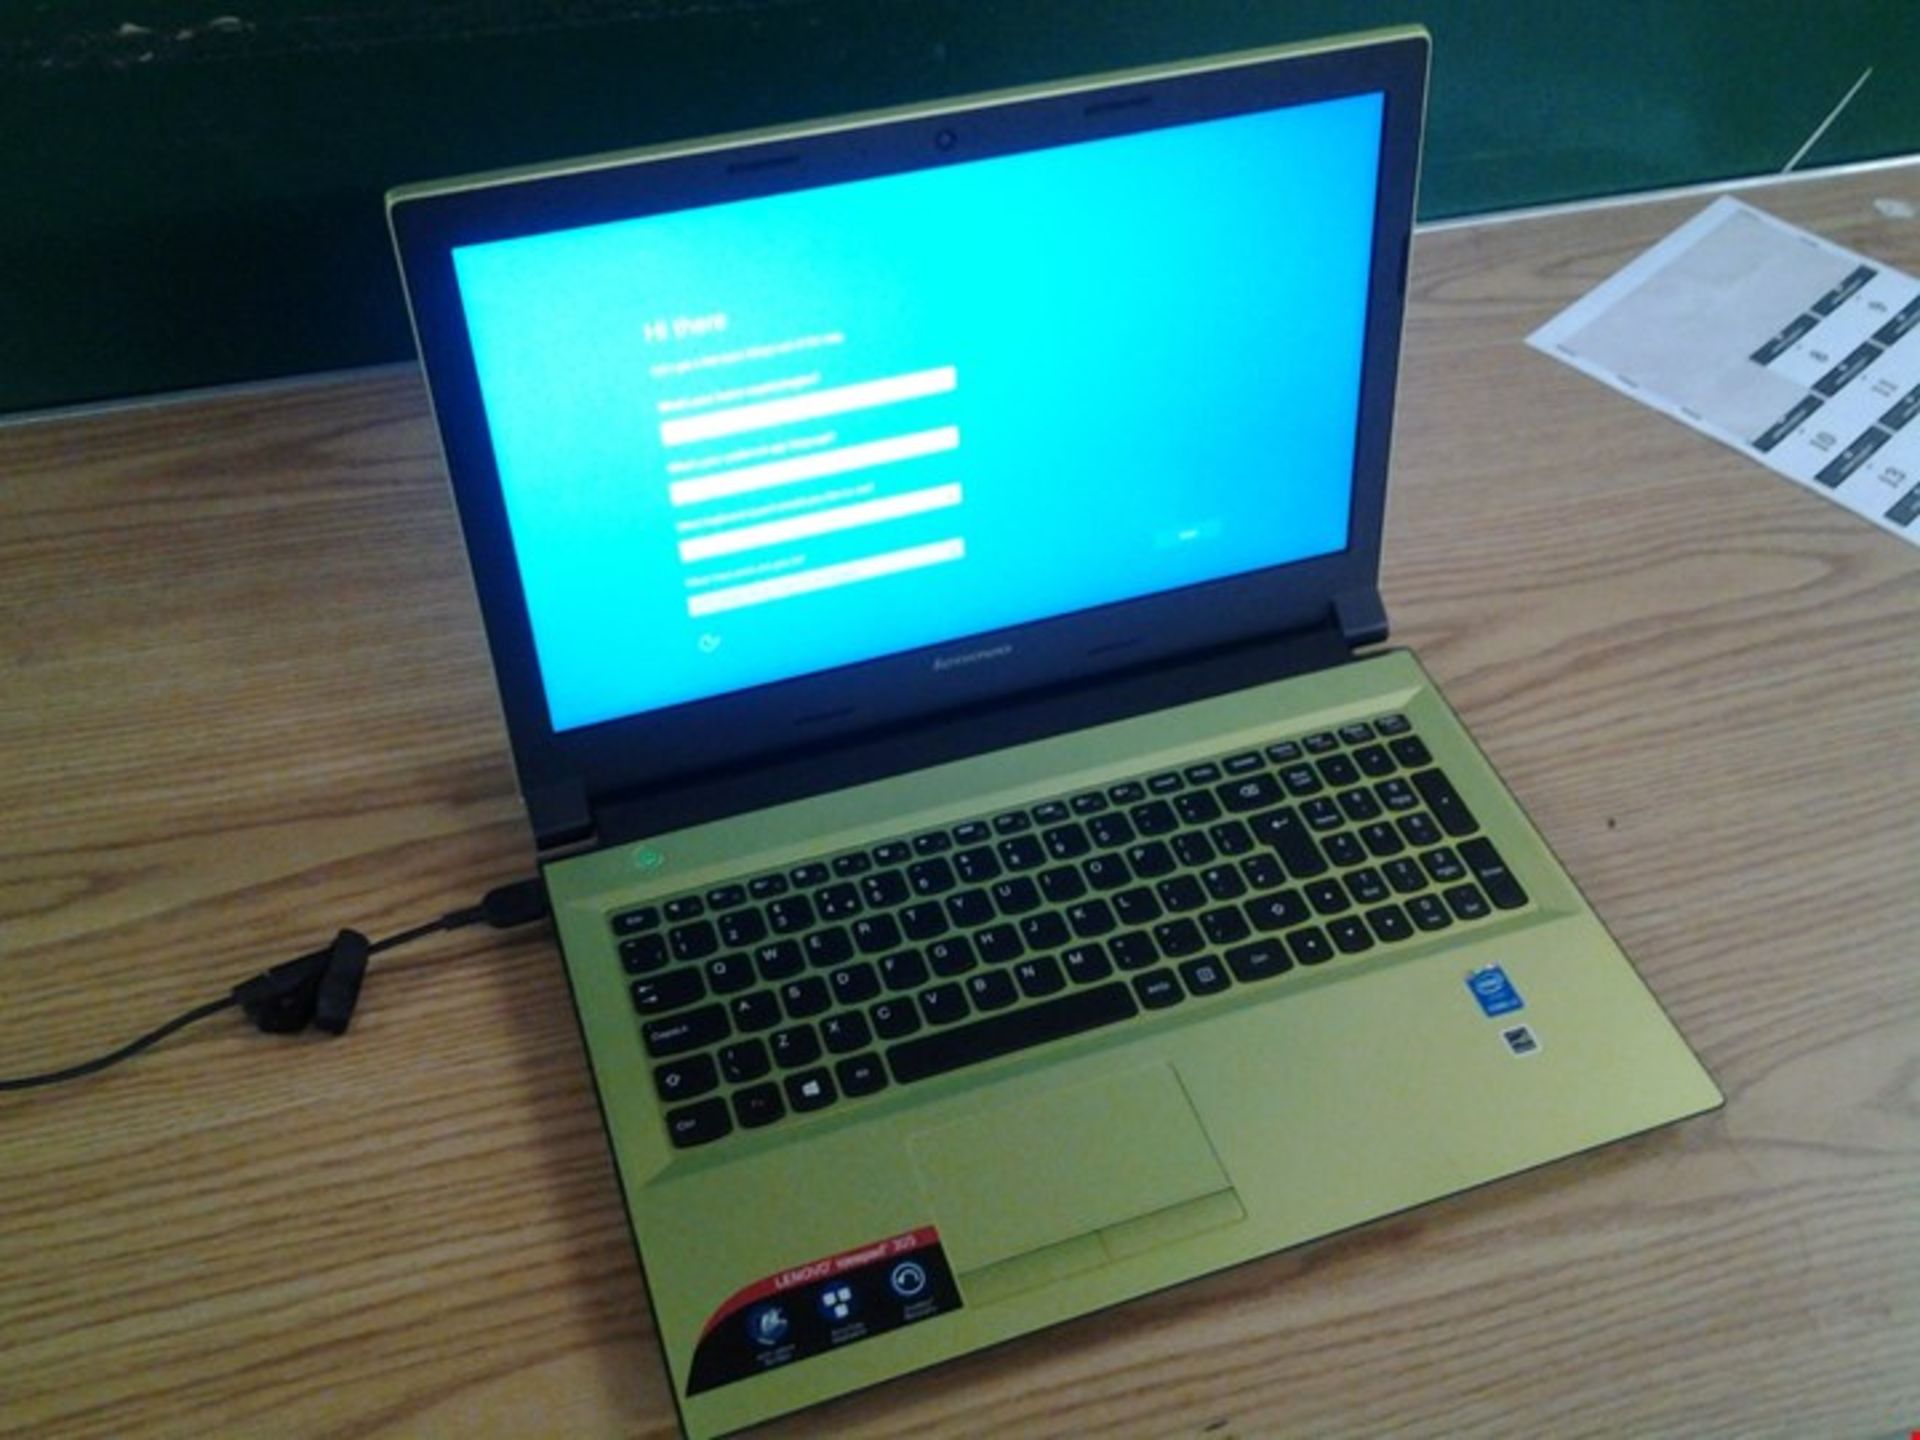 UNBOXED LENOVO IDEAPAD 305 WITH CHARGER - Image 2 of 2